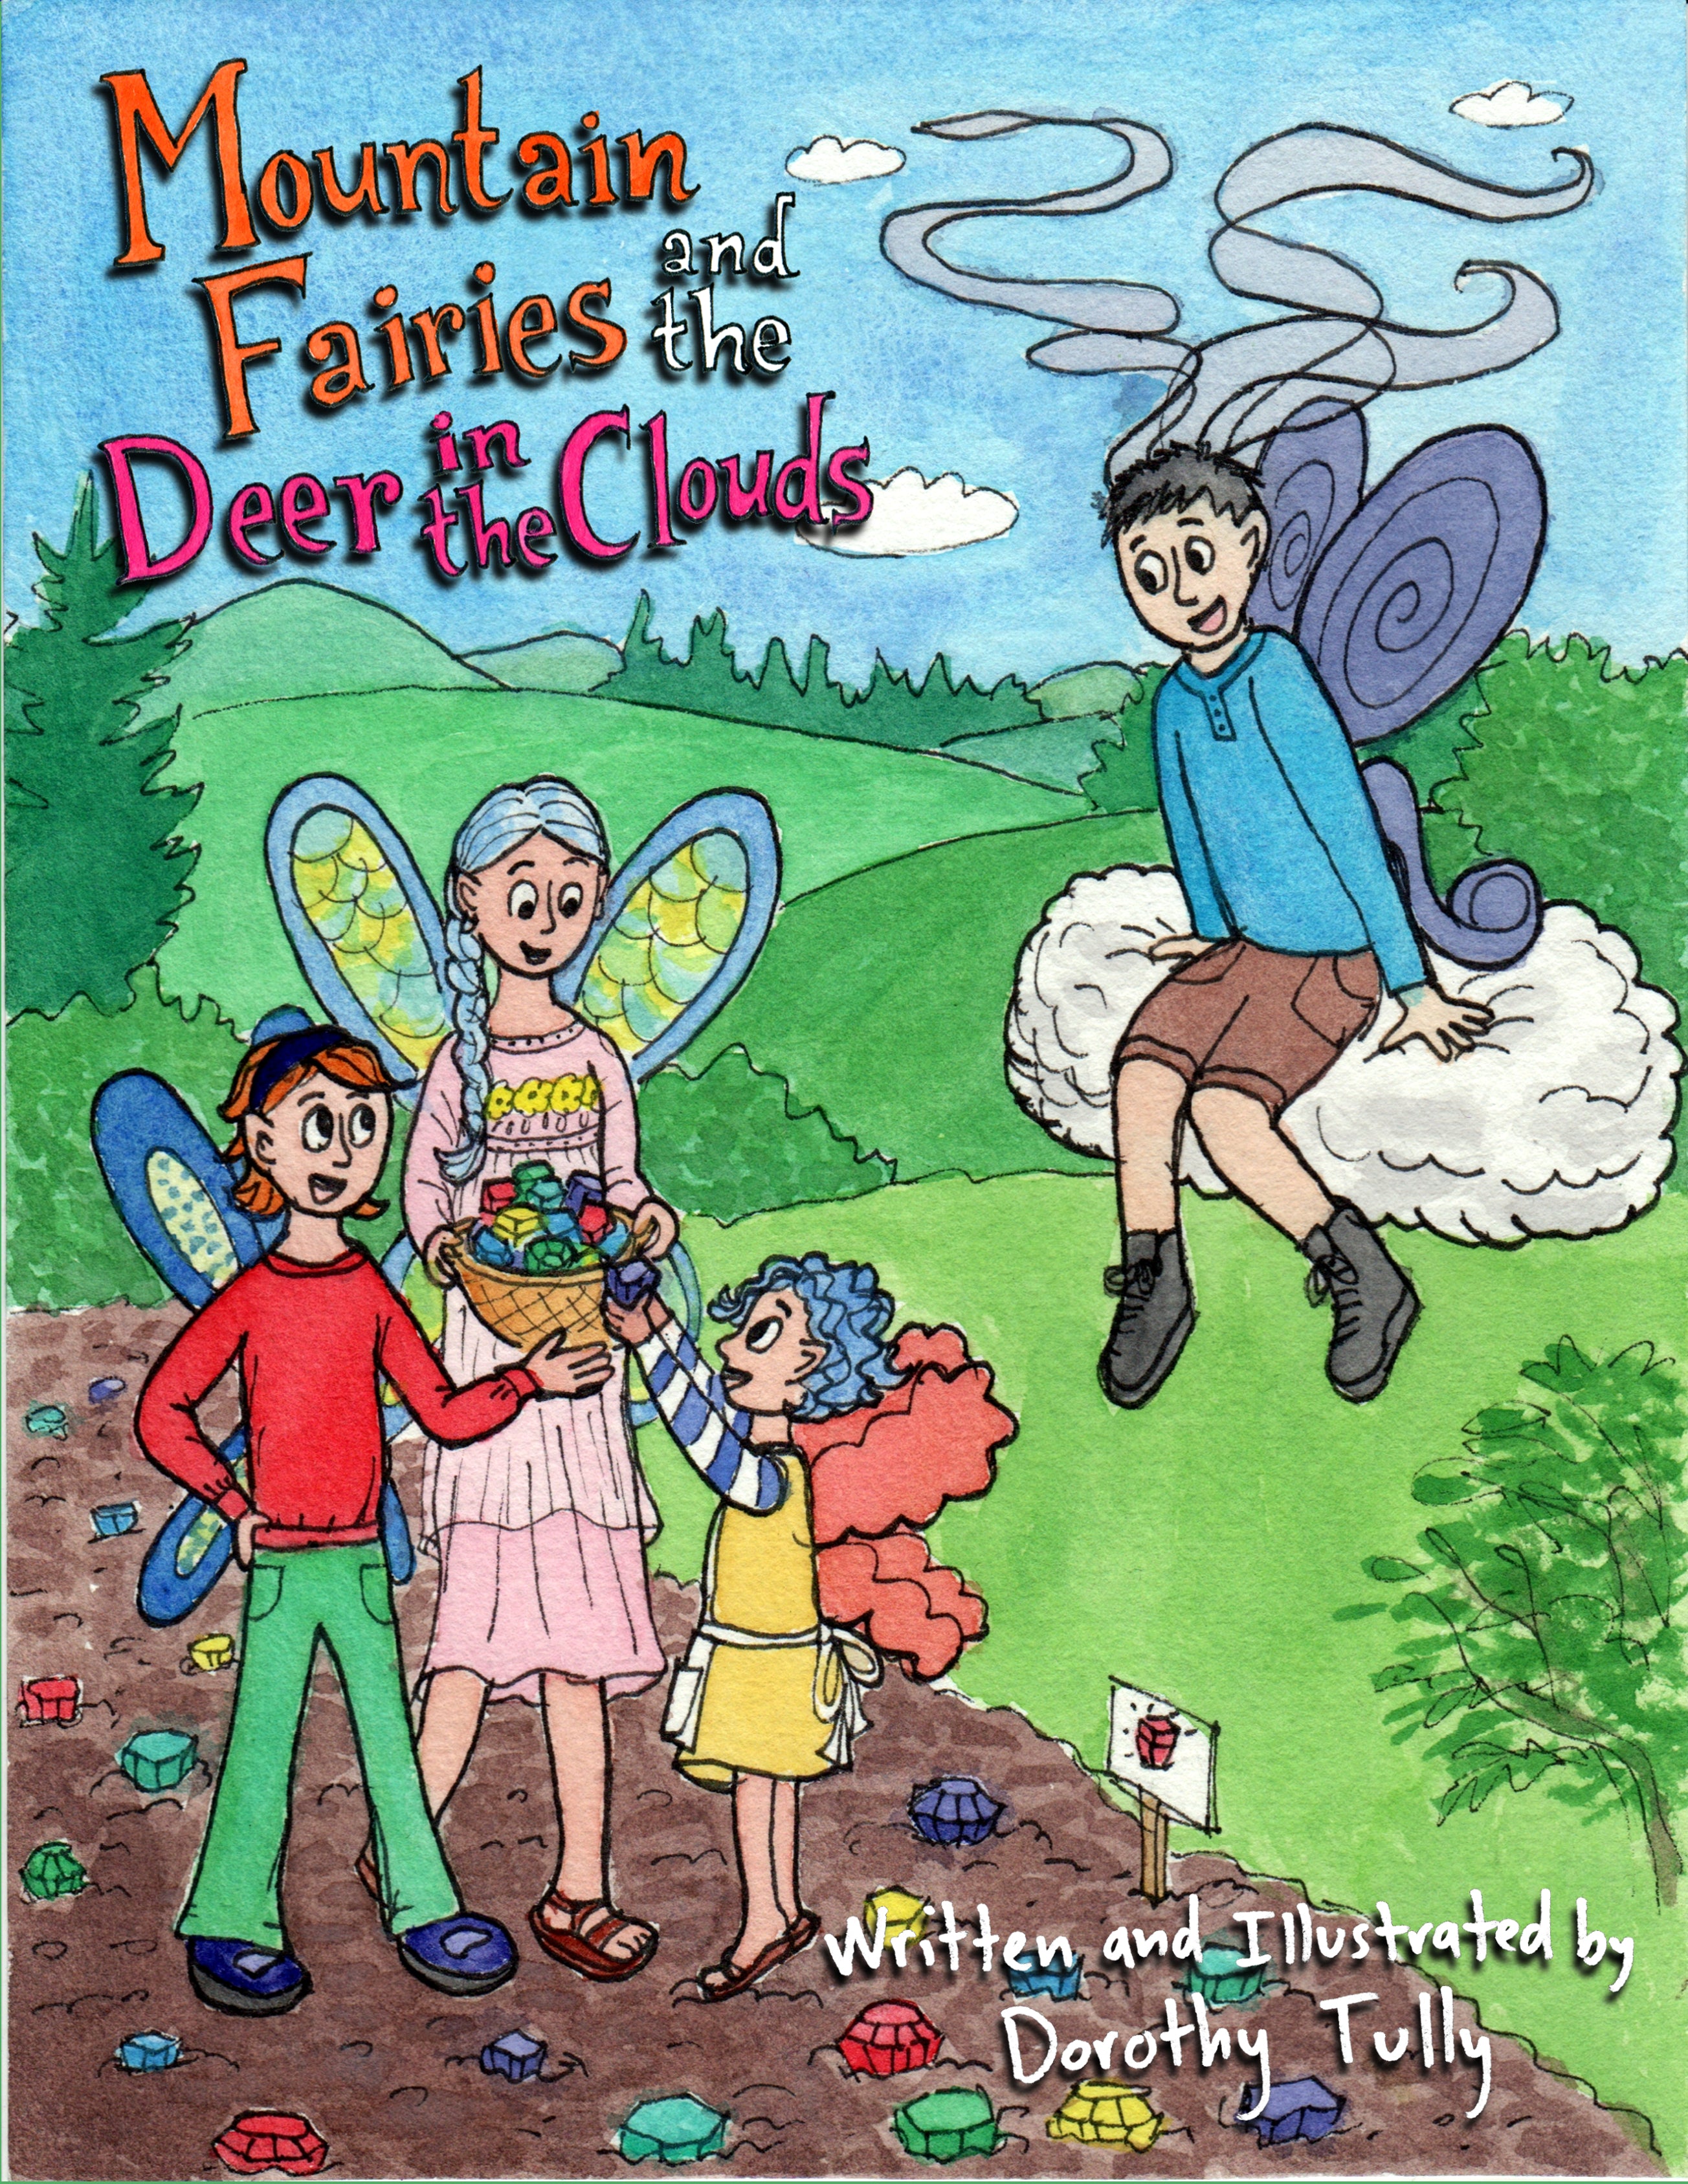 Children's Book by artist author illustrator Dorothy Tully: Mountain Fairies and the Deer in the Clouds, colorful fairies harvest gems while boy looks on from a cloud